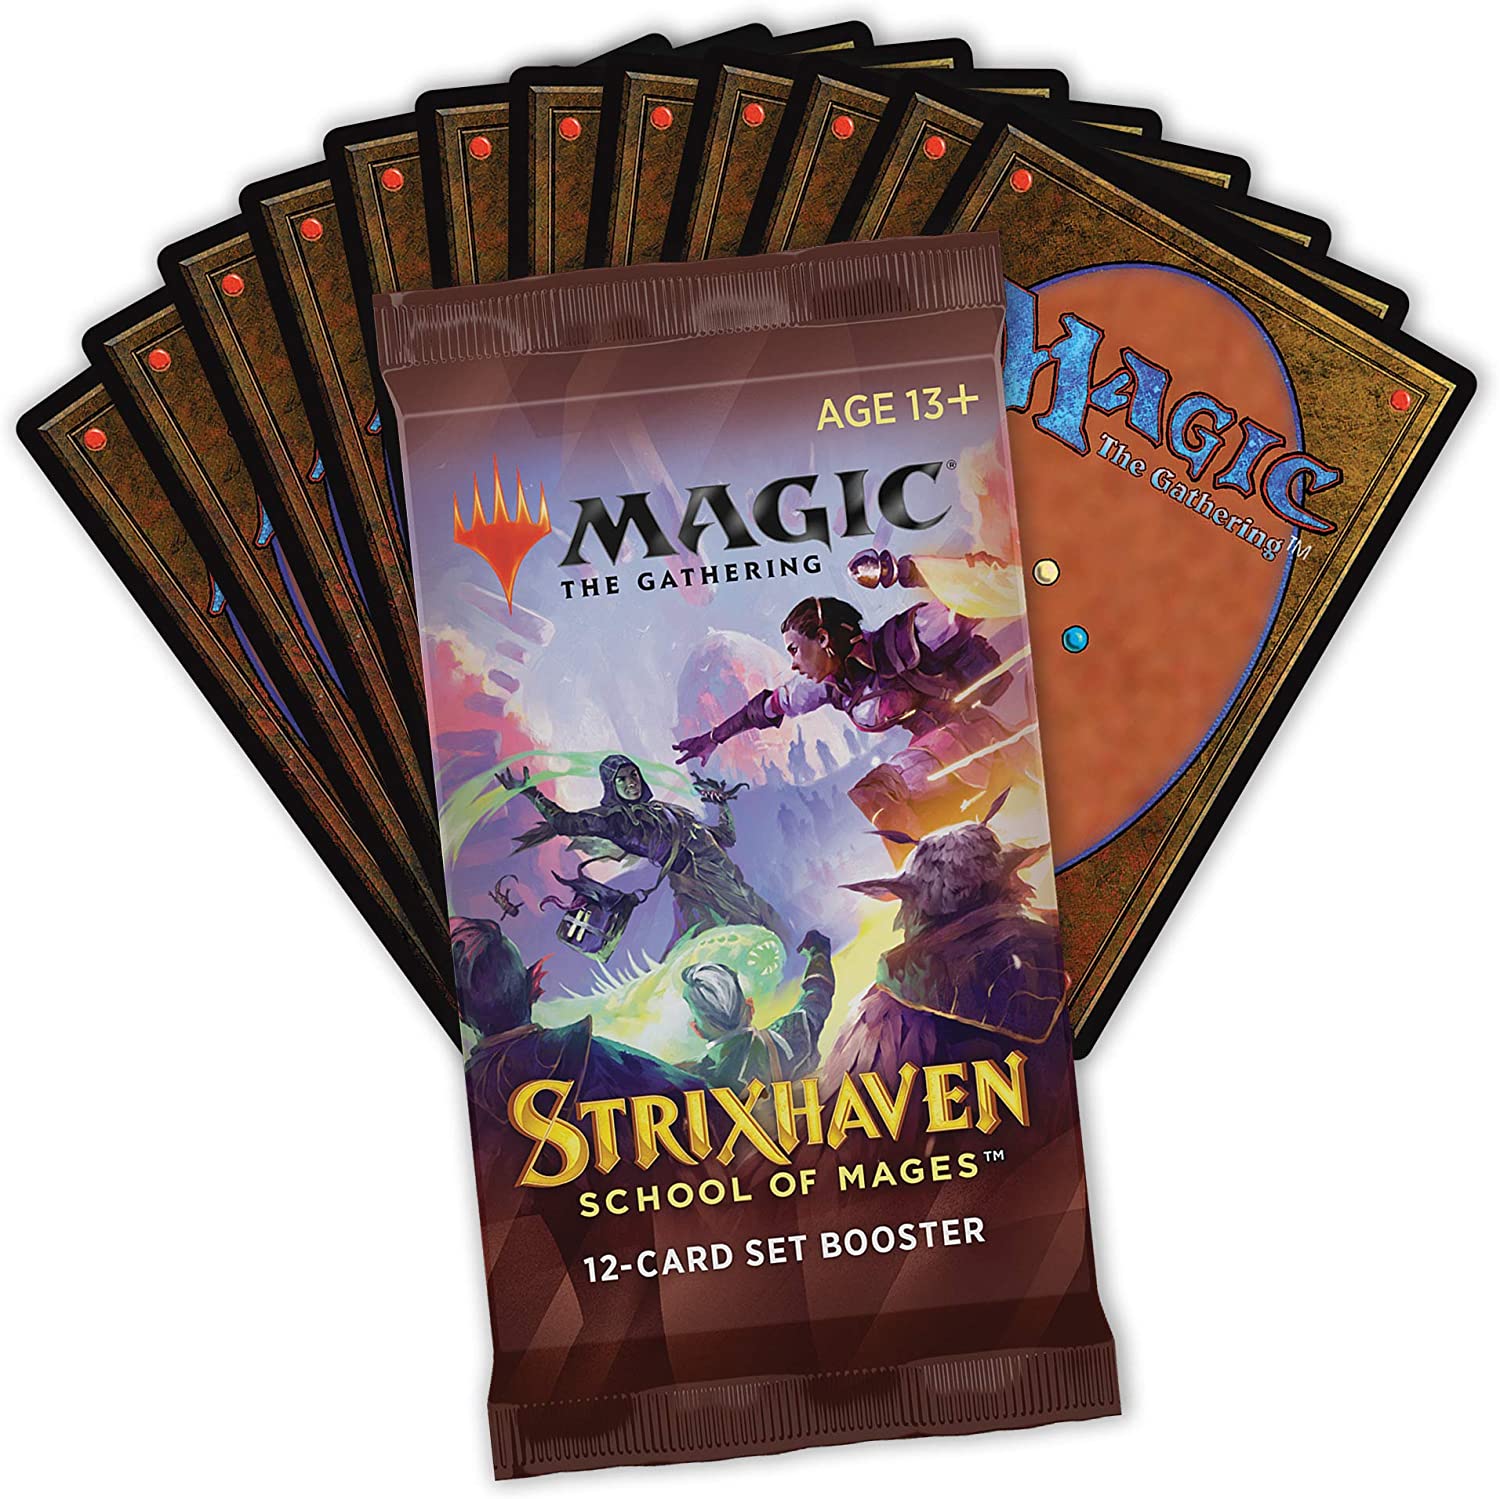 Magic the Gathering | Strixhaven "School of Mages" 12-card SET booster